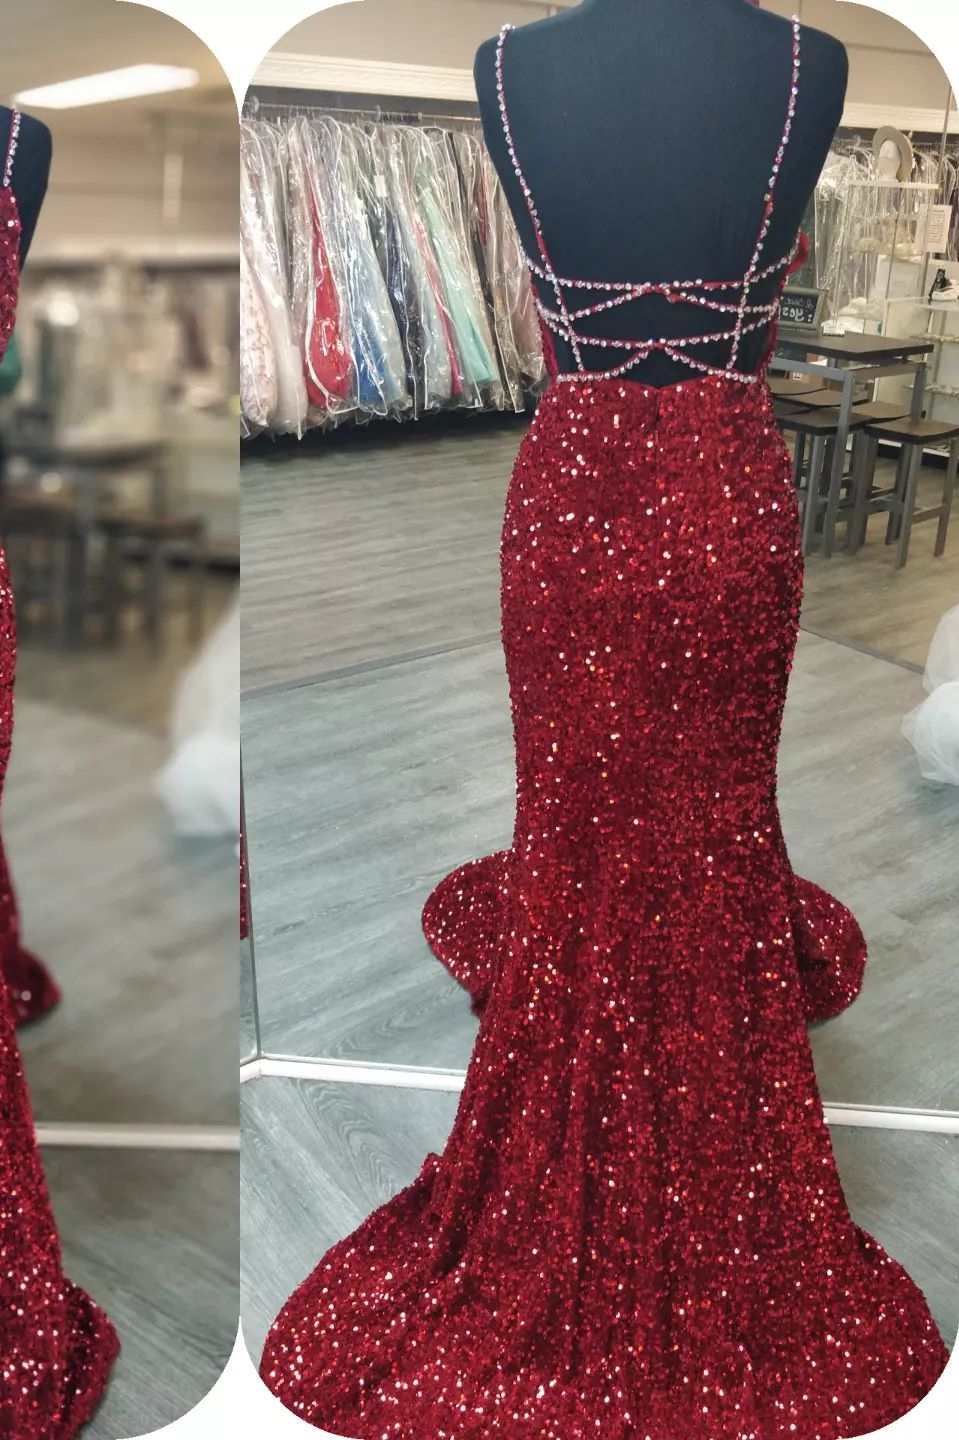 Glittery Mermaid Red Sequin V-Neck Lace-Up Back Prom Dress Gala Gown